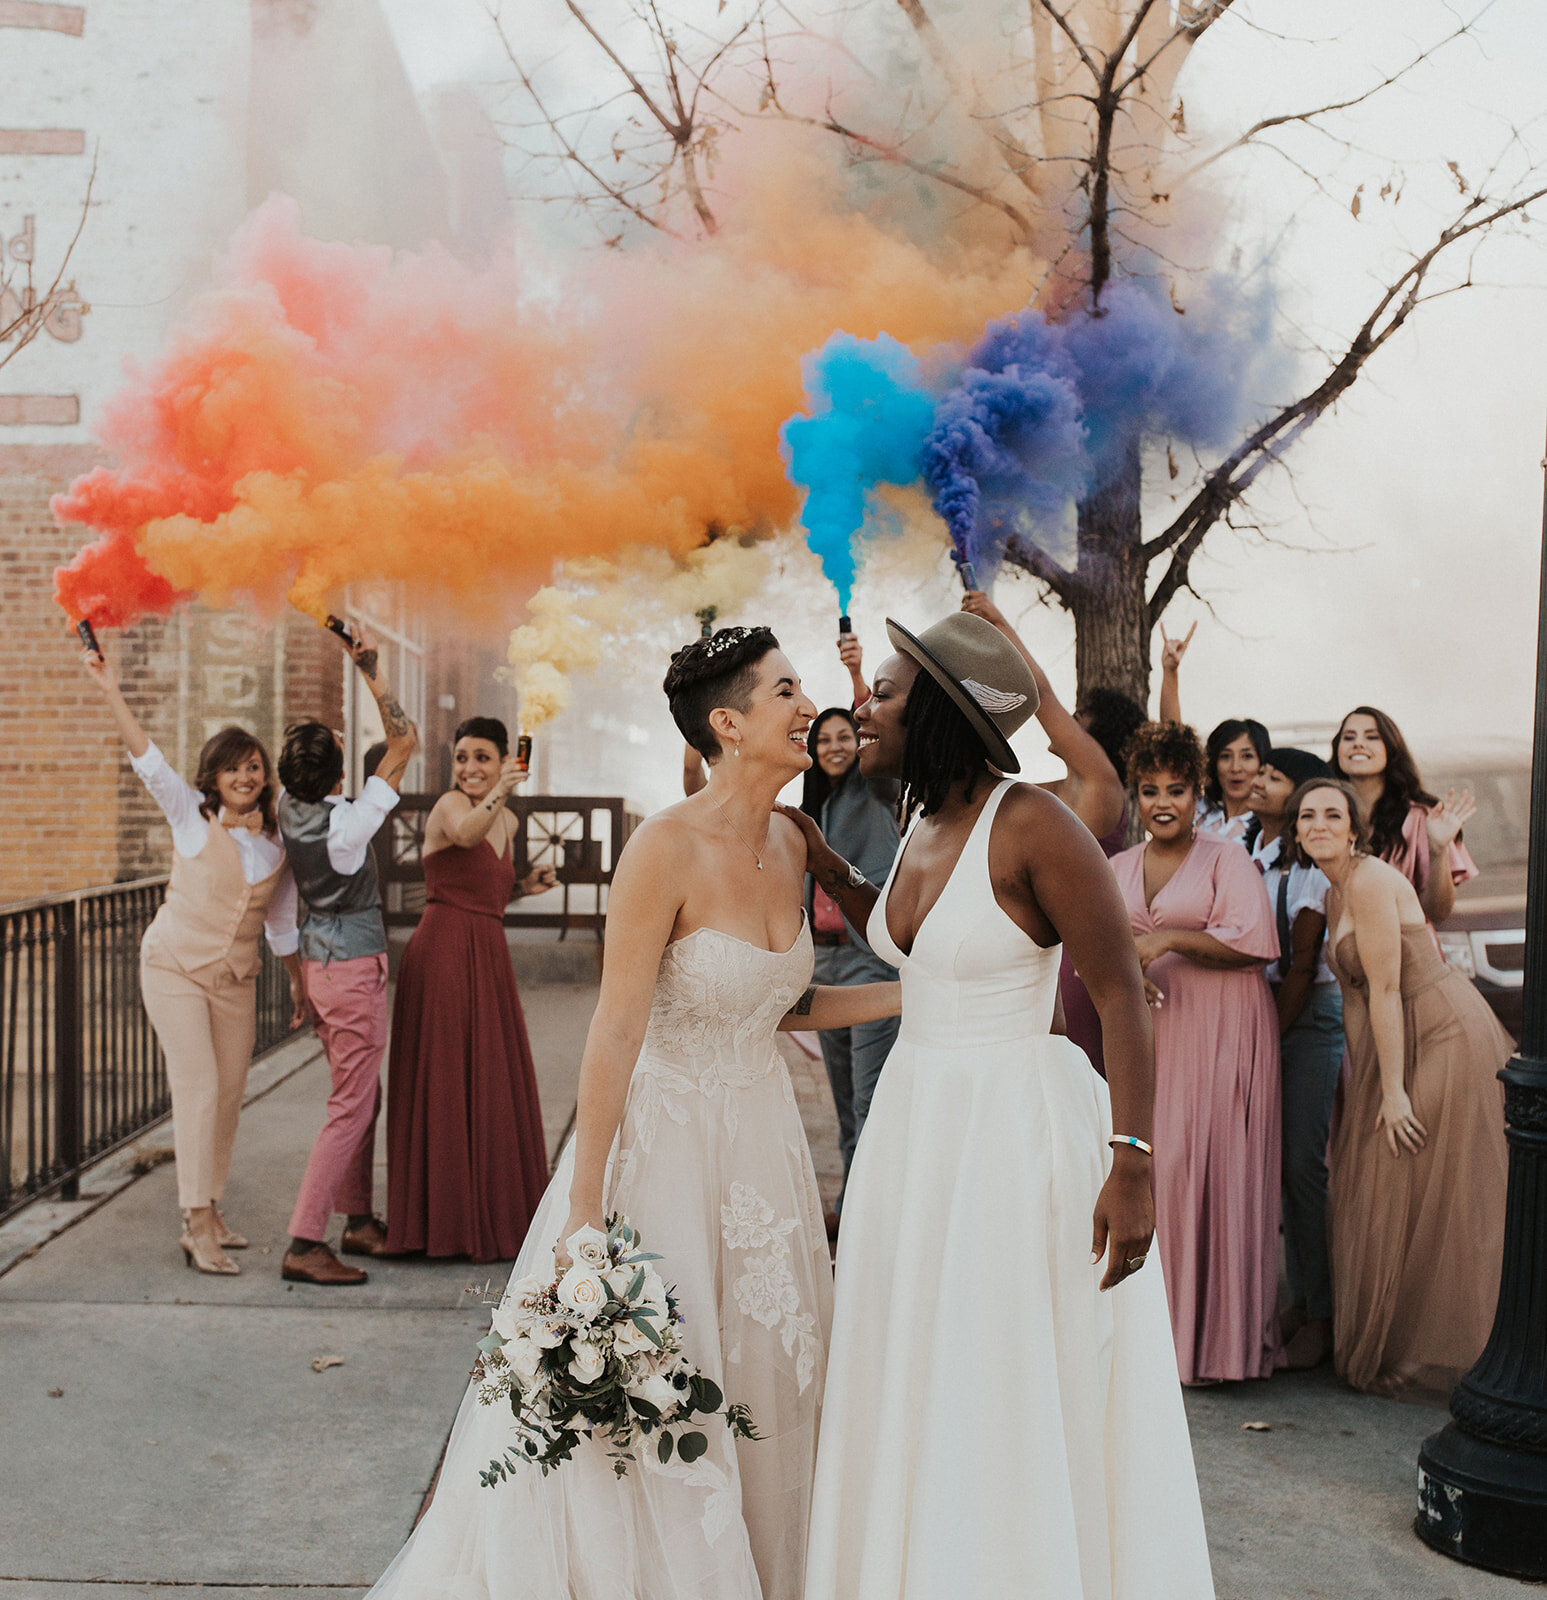 Rainbow smoke bombs for LGBTQ wedding exit at the st vrain, colorado